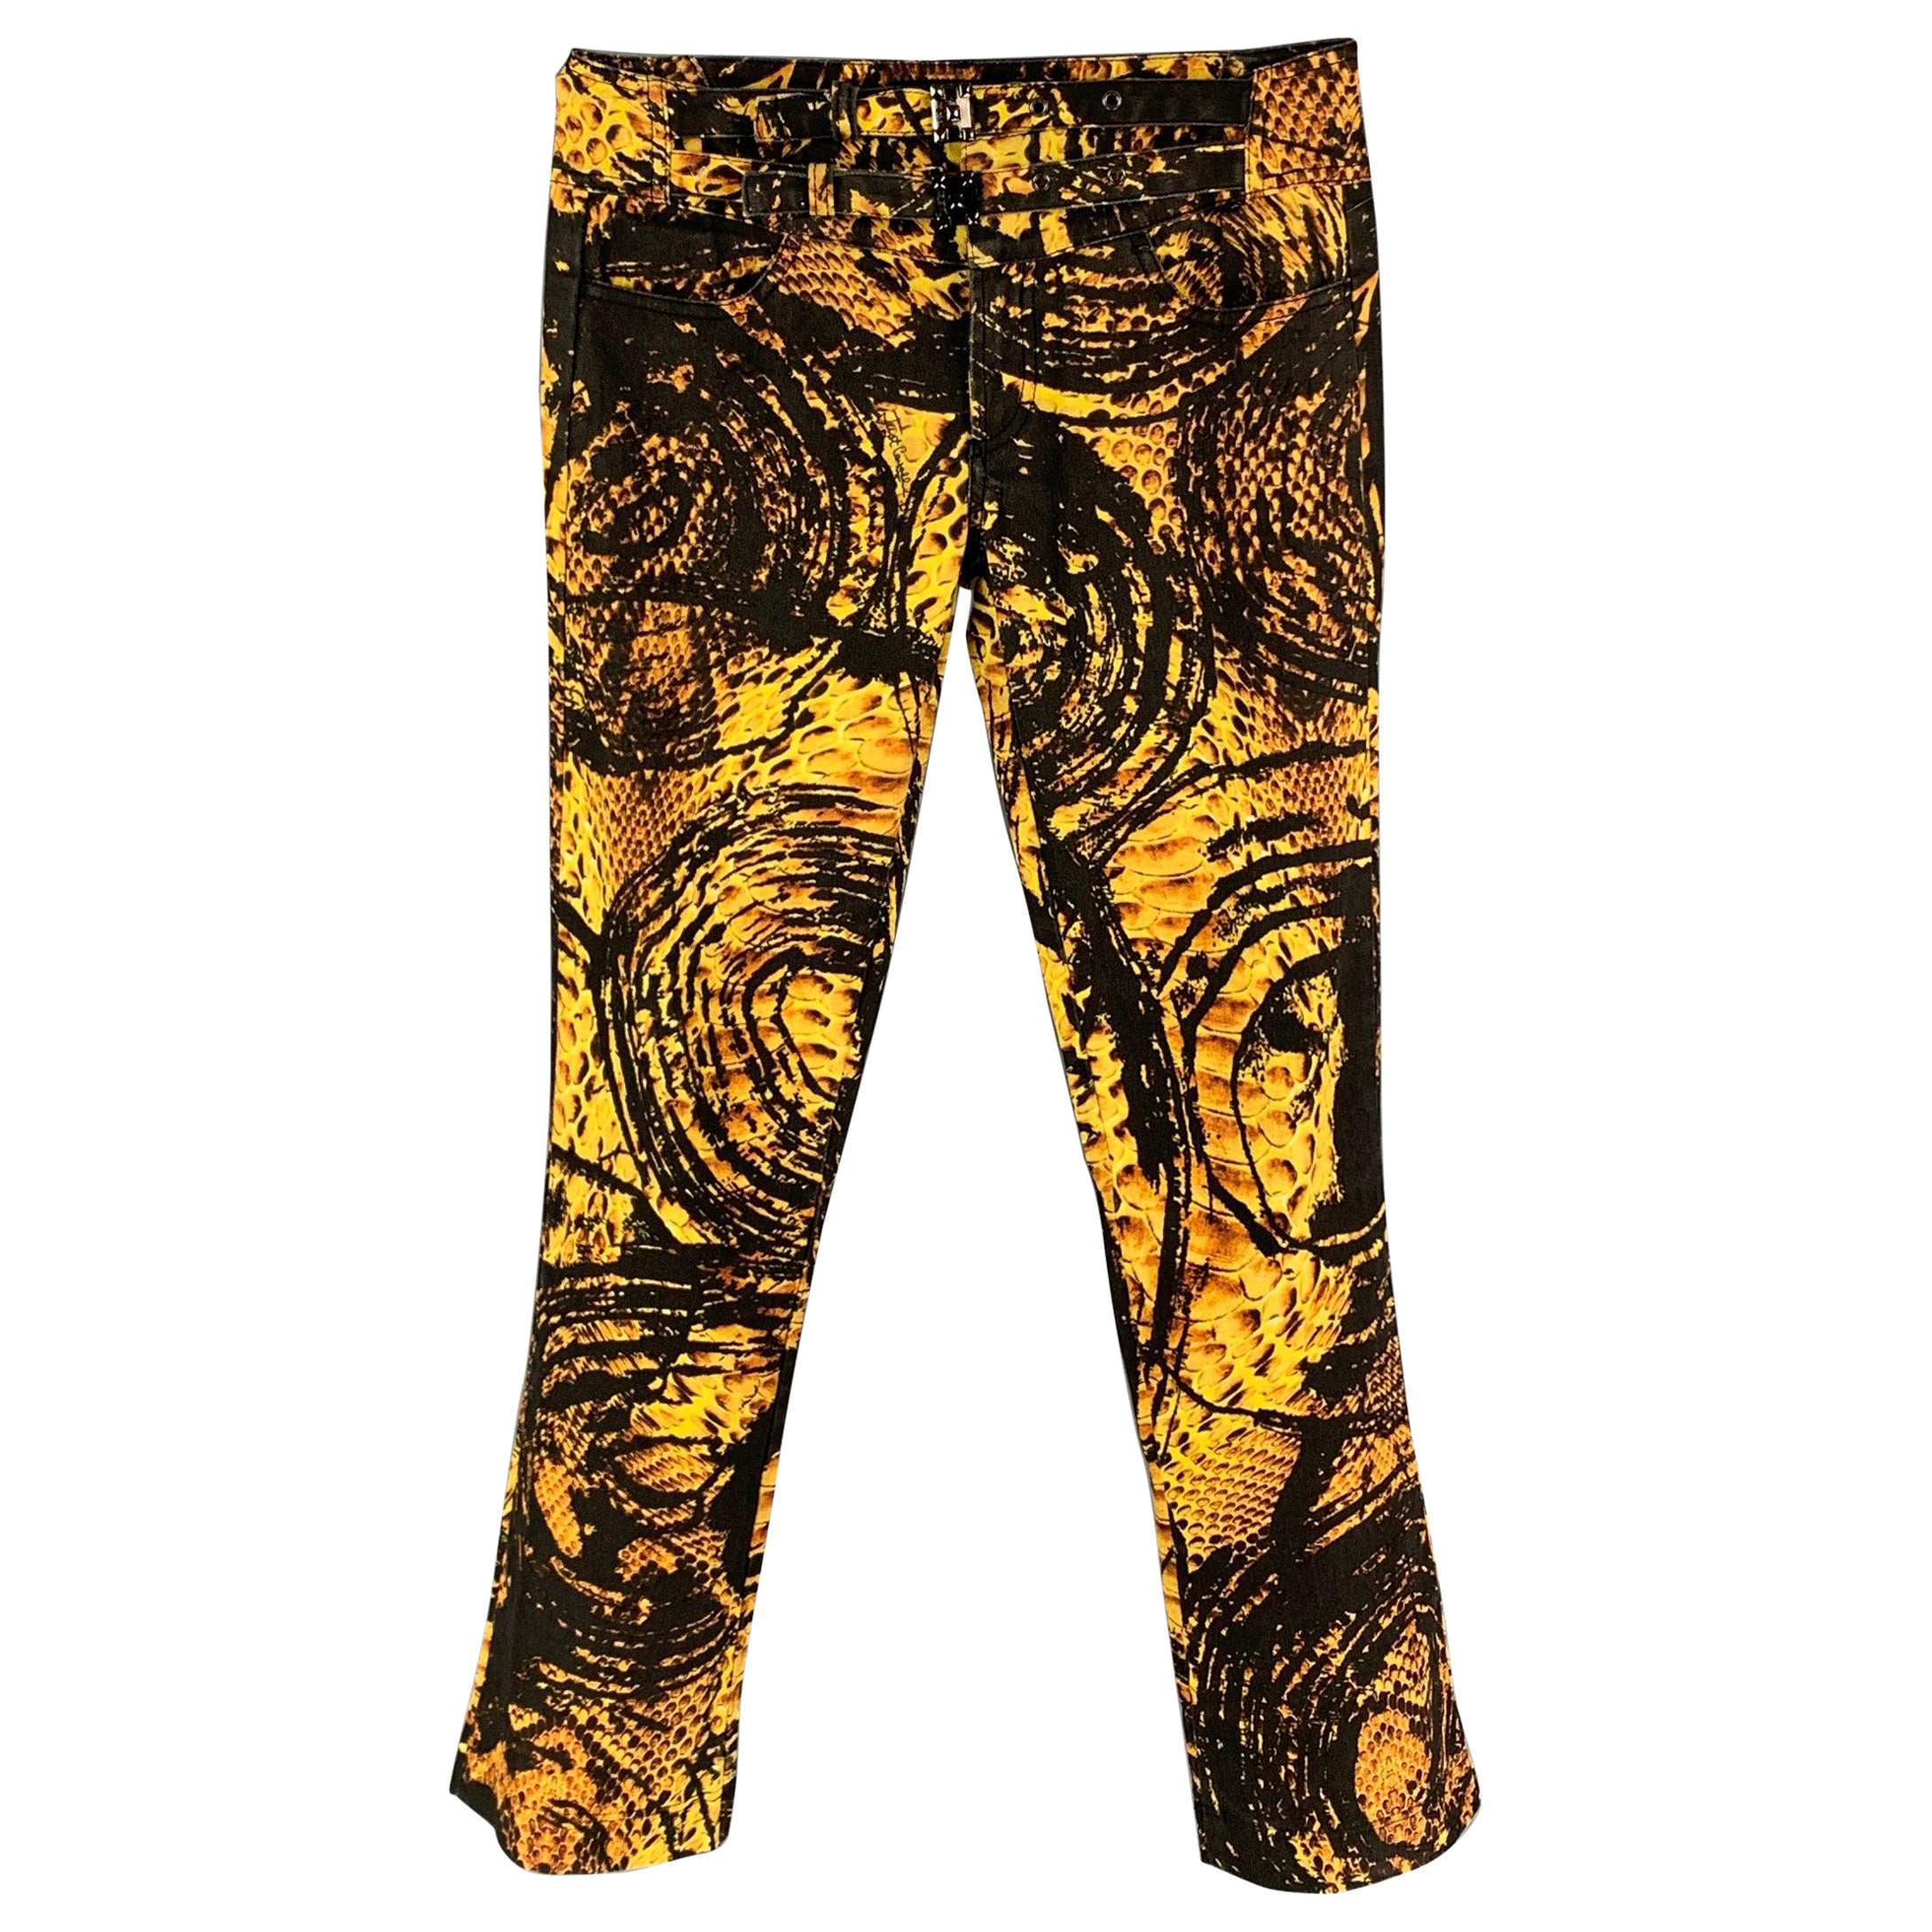 JUST CAVALLI Size 29 Yellow Black Graphic Print Cotton Zip Casual Pants For Sale